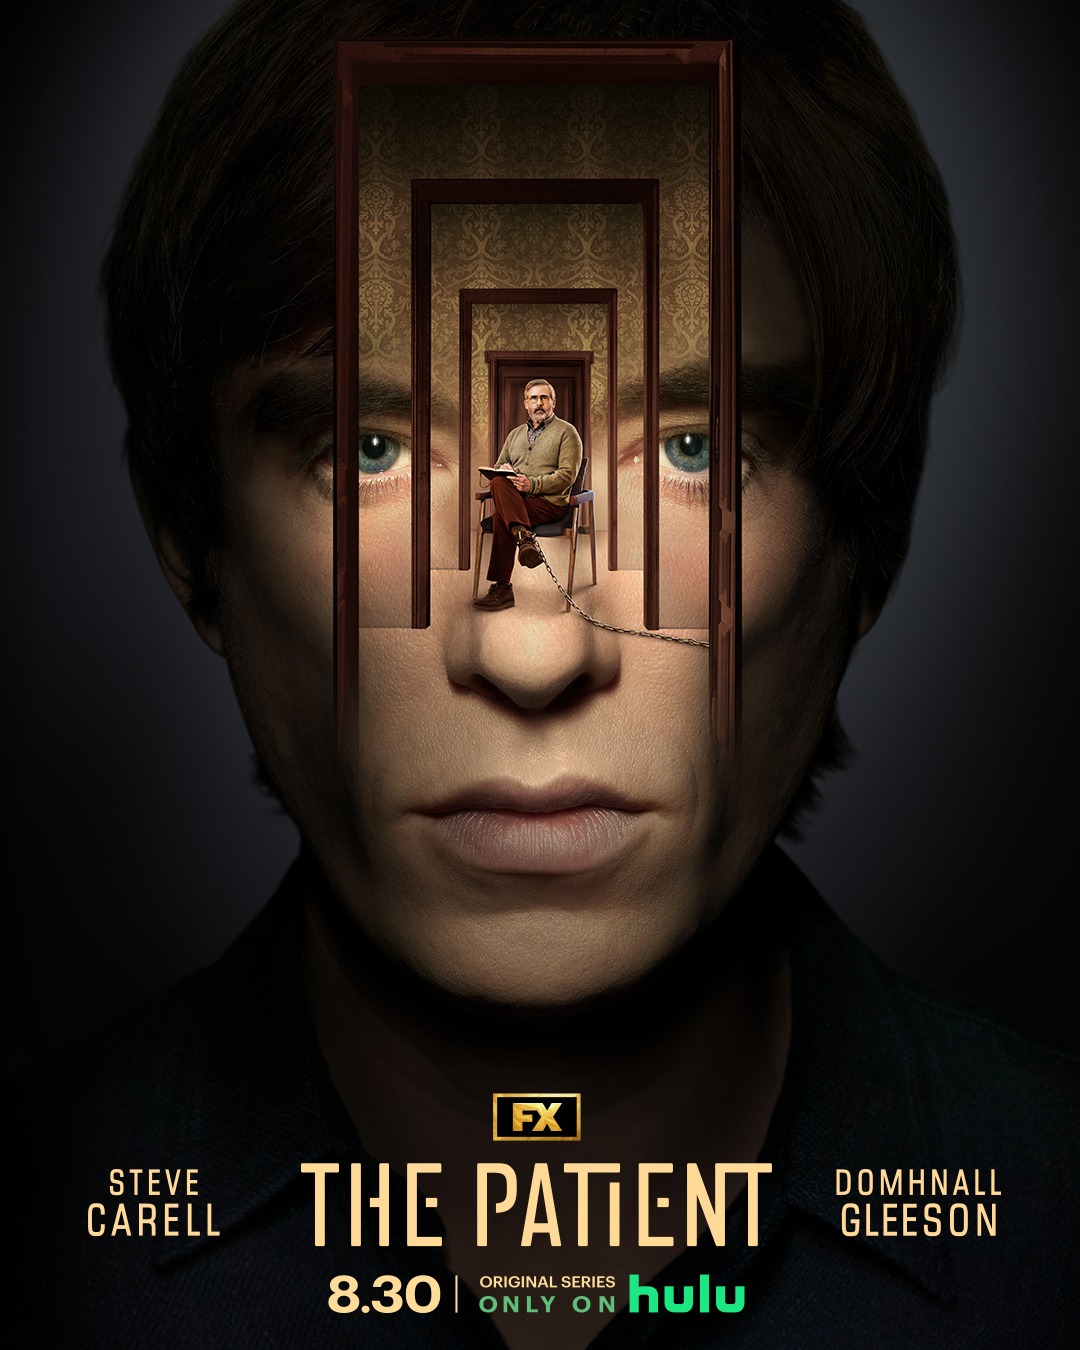 The Patient Season 1 (Episode 9 Added) [TV Series]